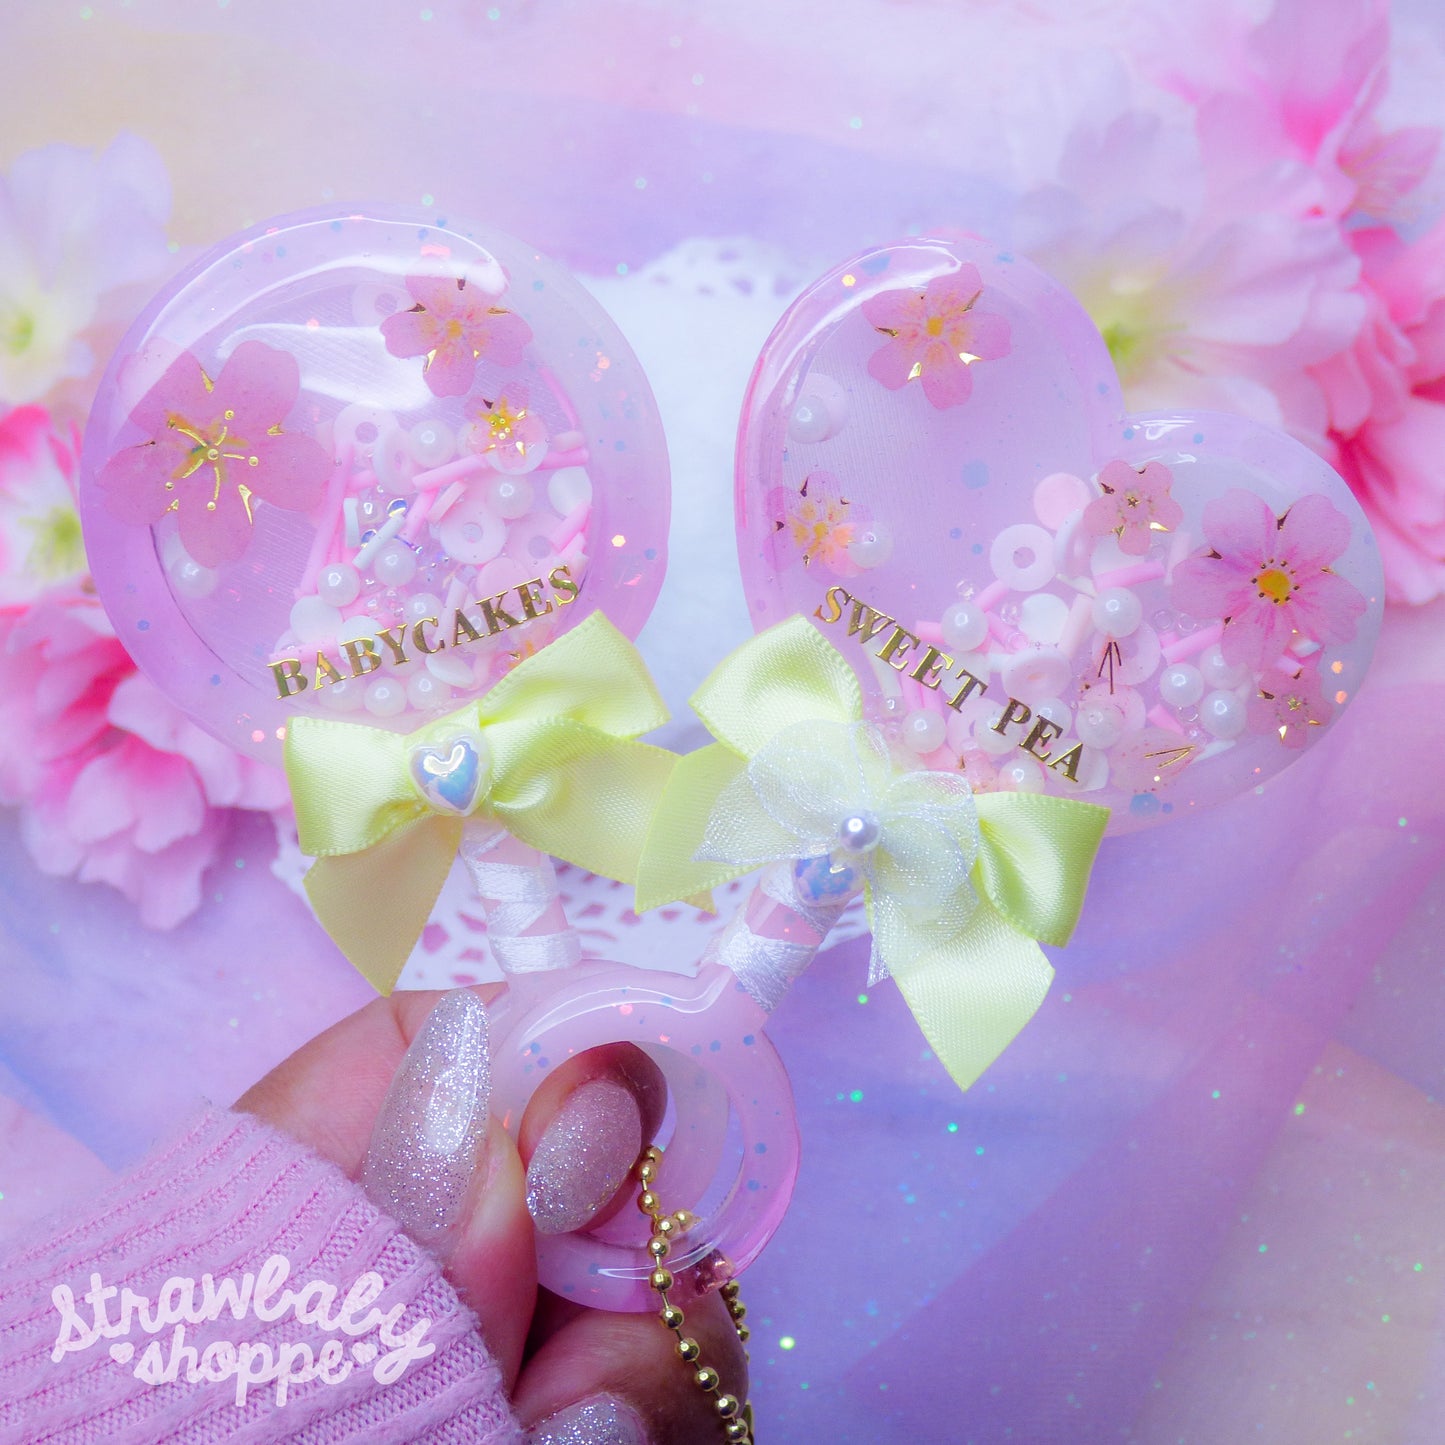 Ur a Sweetie - Rattle Shaker Charms